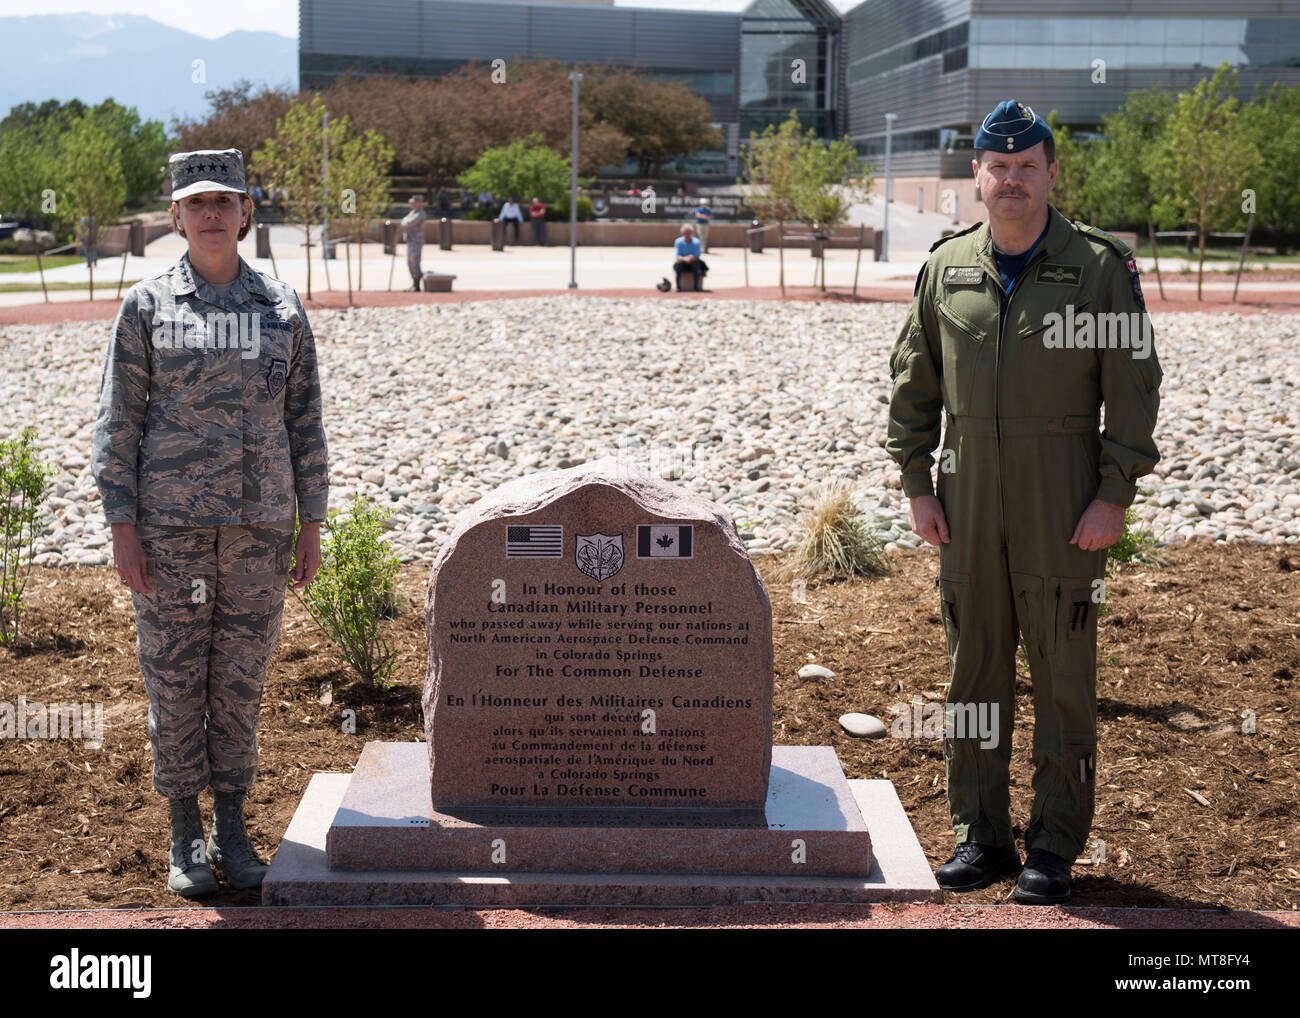 U.S. Air Force General Lori Robinson, Commander of the North American Aerospace Defense Command and U.S. Northern Command and Canadian Lt. Gen. Pierre St-Amand, the NORAD Deputy Commander pause for a photo during the unveiling ceremony for a memorial cairn outside the NORAD and USNORTHCOM headquarters building on Peterson Air Force Base, Colorado, May 11. The cairn honors the Canadian service men and women who passed away while serving at NORAD in Colorado Springs. The placement and dedication of the cairn was conducted in conjunction with the 60th Anniversary of NORAD and the U.S. Canadian bi Stock Photo